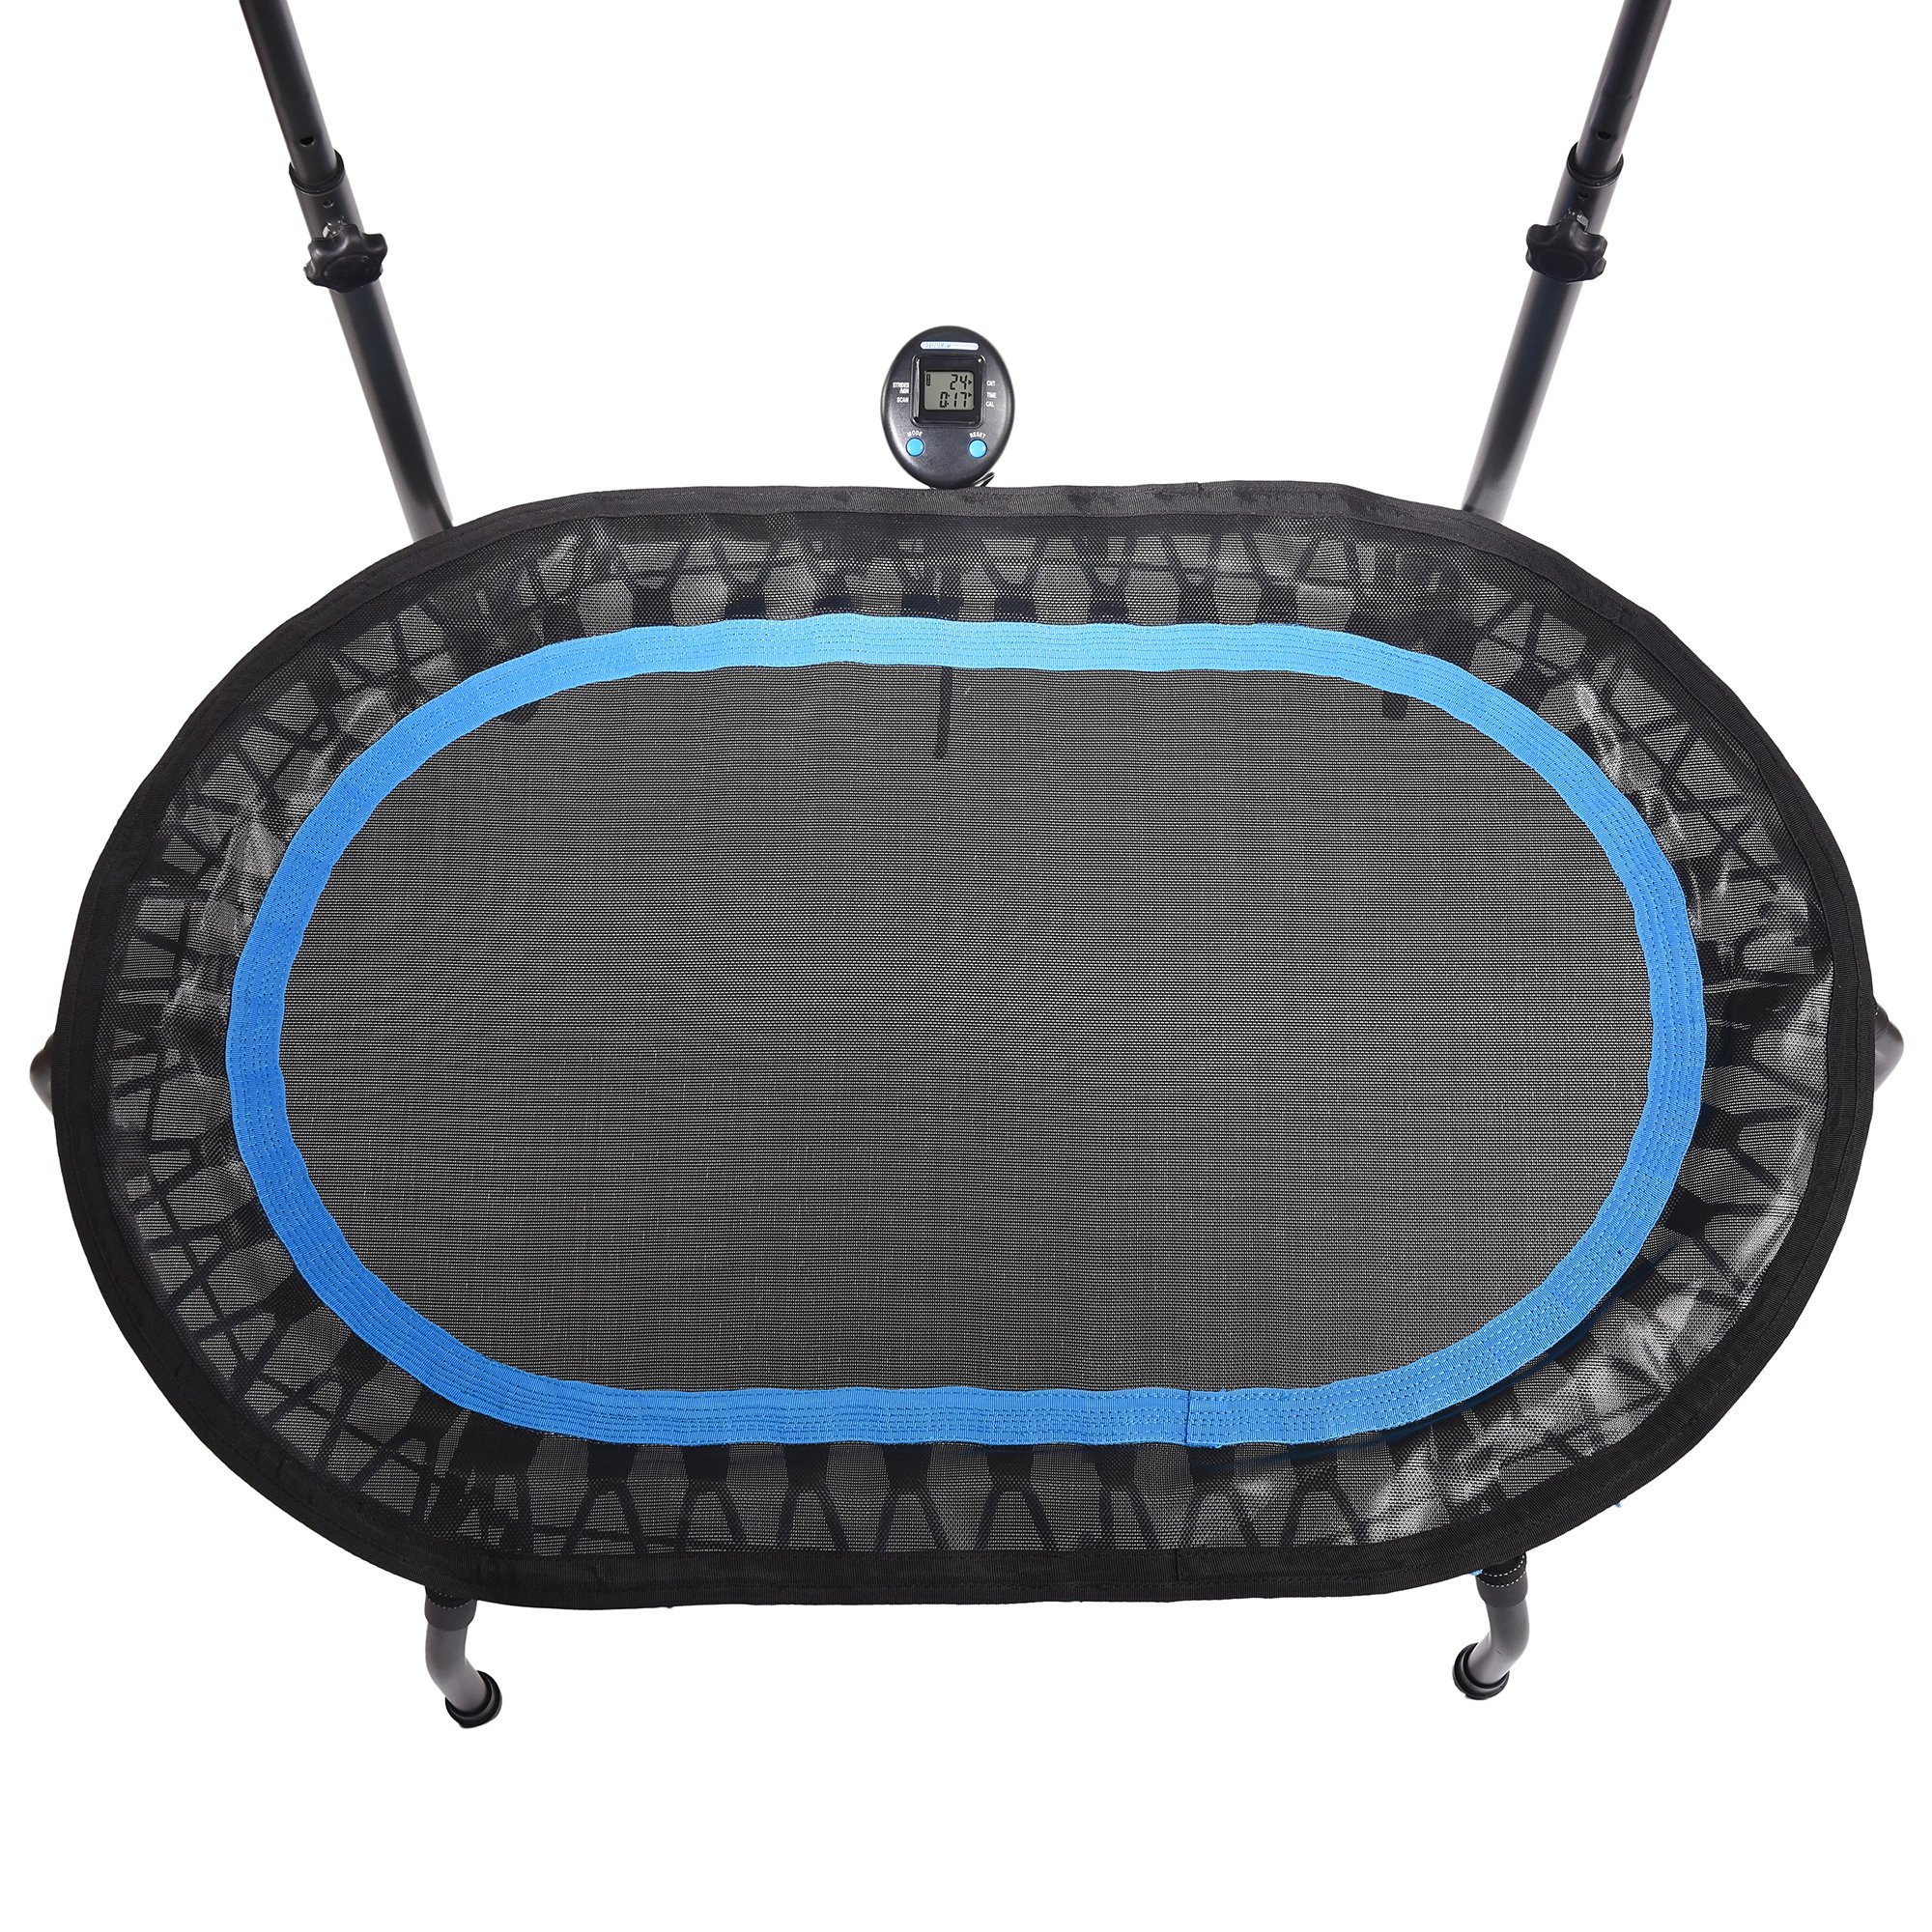 Stamina InTone Oval Fitness Rebounder Trampoline for Cardio with Handlebars - image 4 of 9